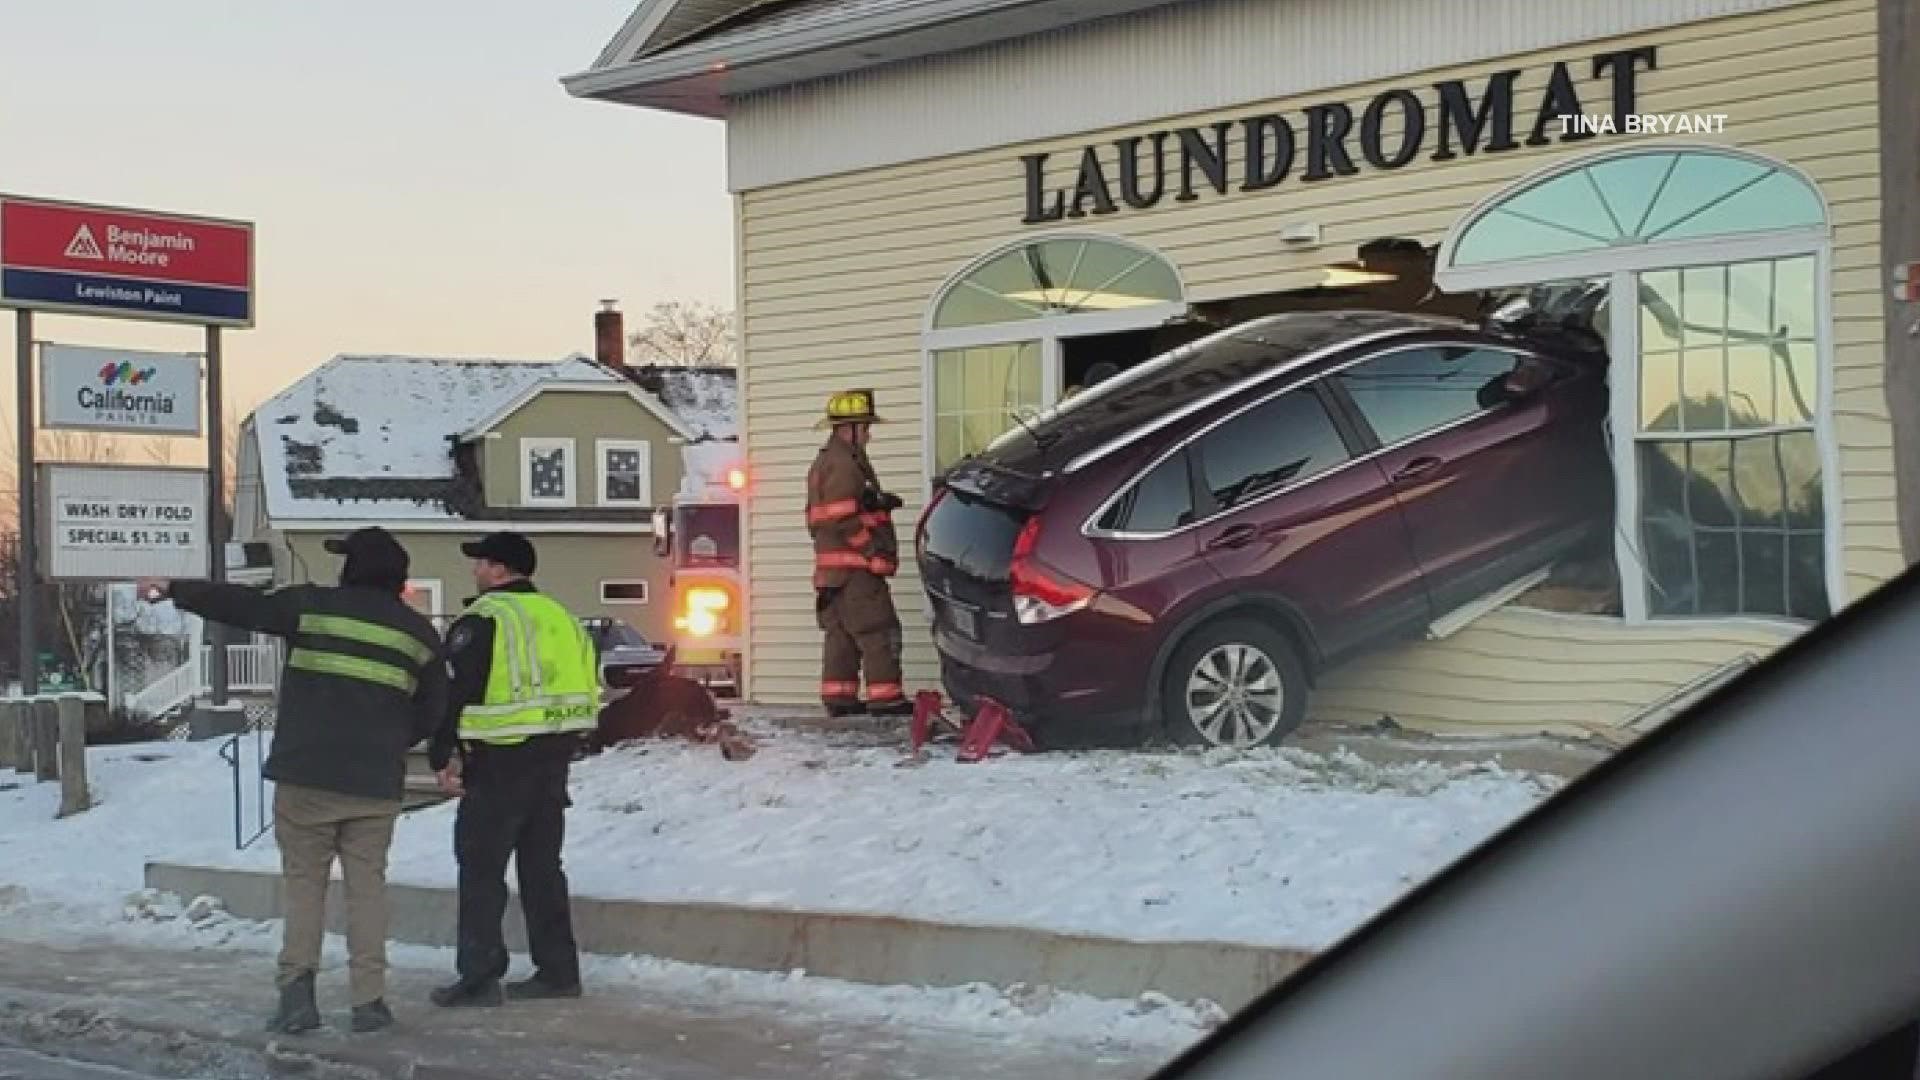 A two-vehicle crash Monday morning sent a car through the front of a laundromat in Lewiston.